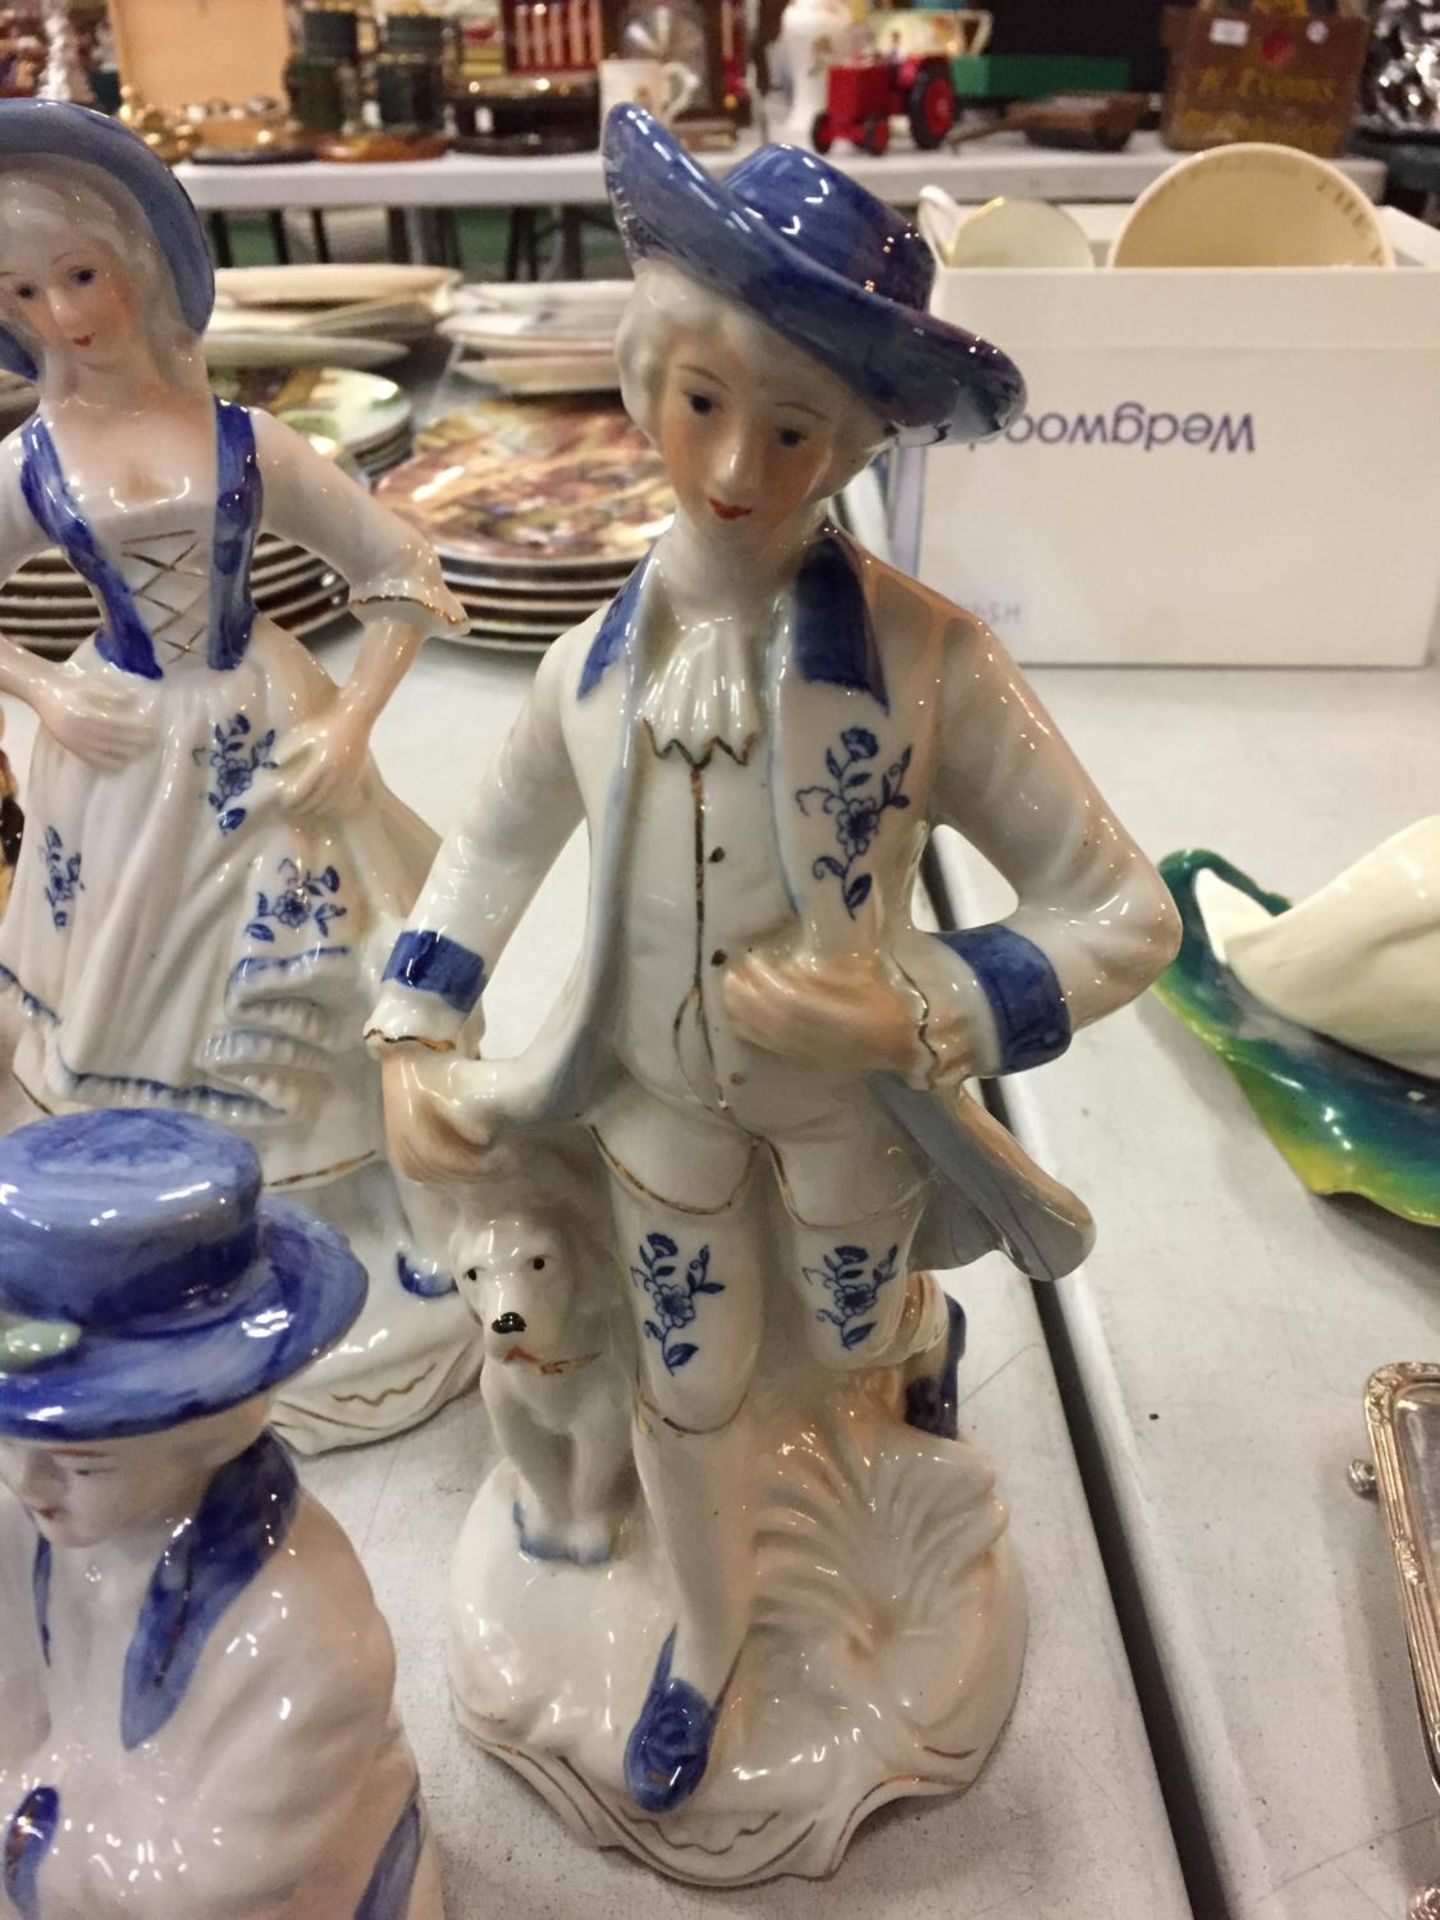 A MIXED COLLECTION OF BLUE AND WHITE FIGURES AND FIGURINES TOGETHER WITH A PAIR OF BOXED CUFFLINKS - Image 4 of 5